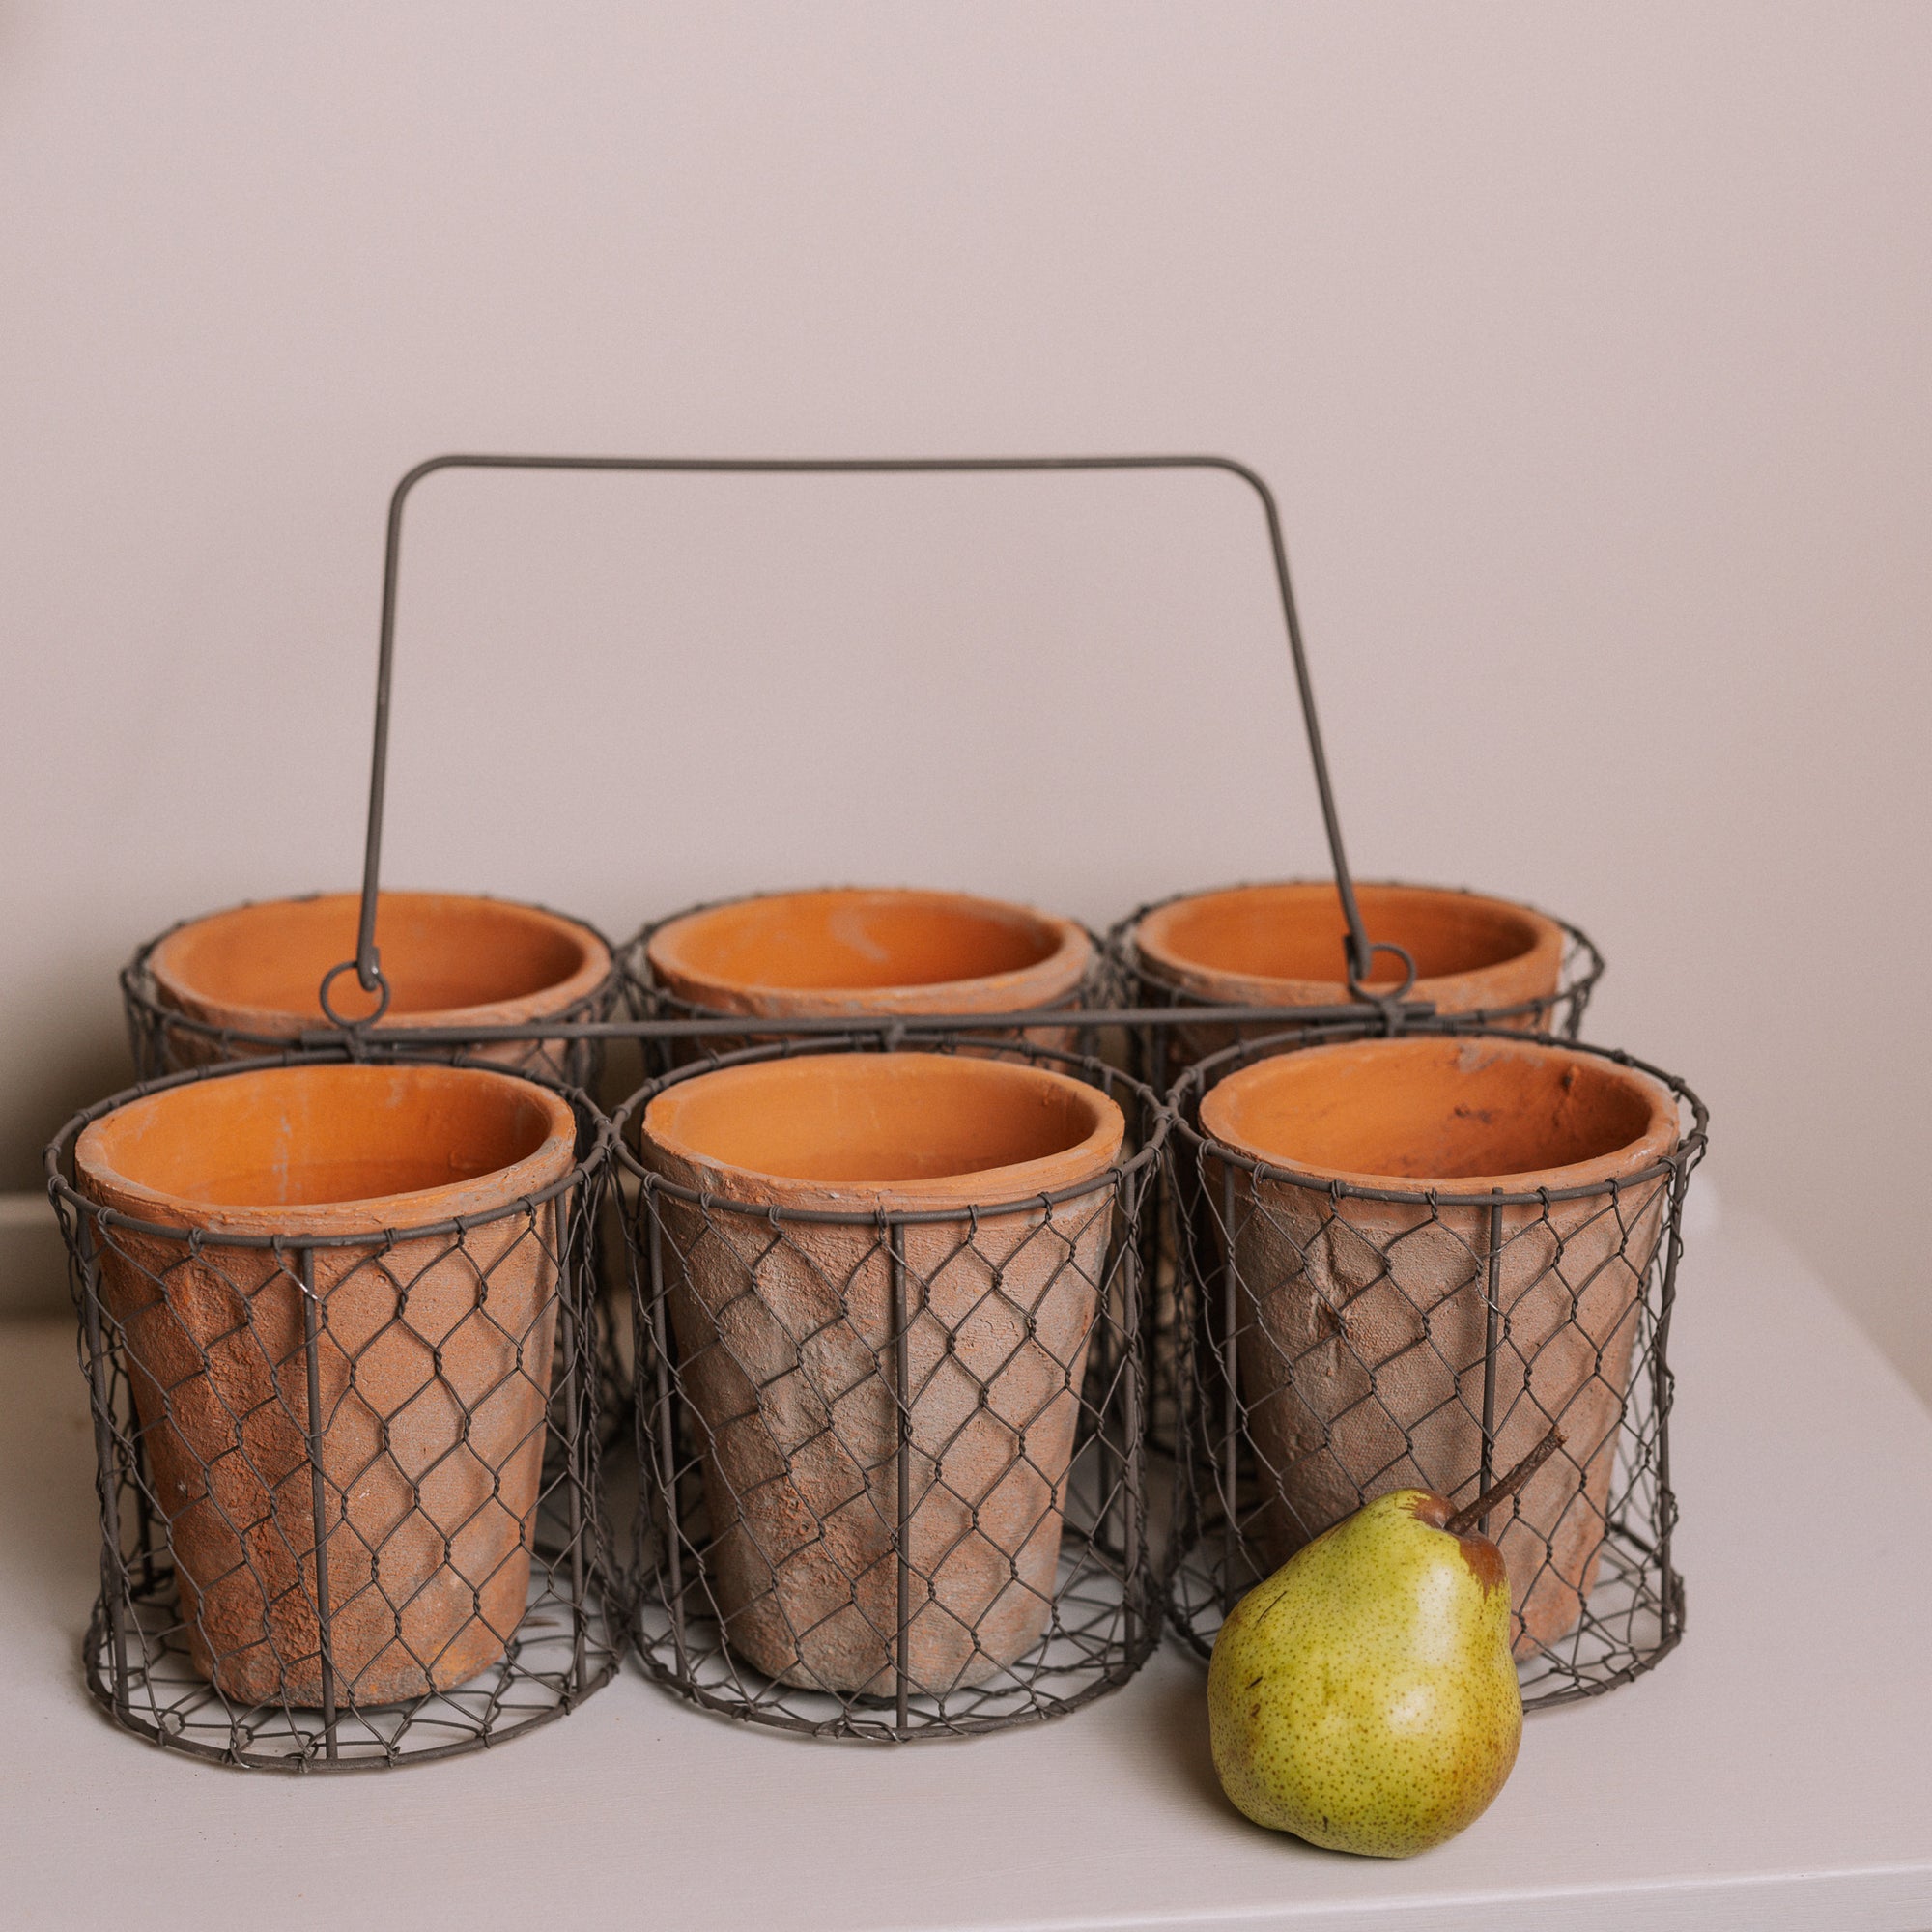 Clay herb pots in wire basket with a pear.